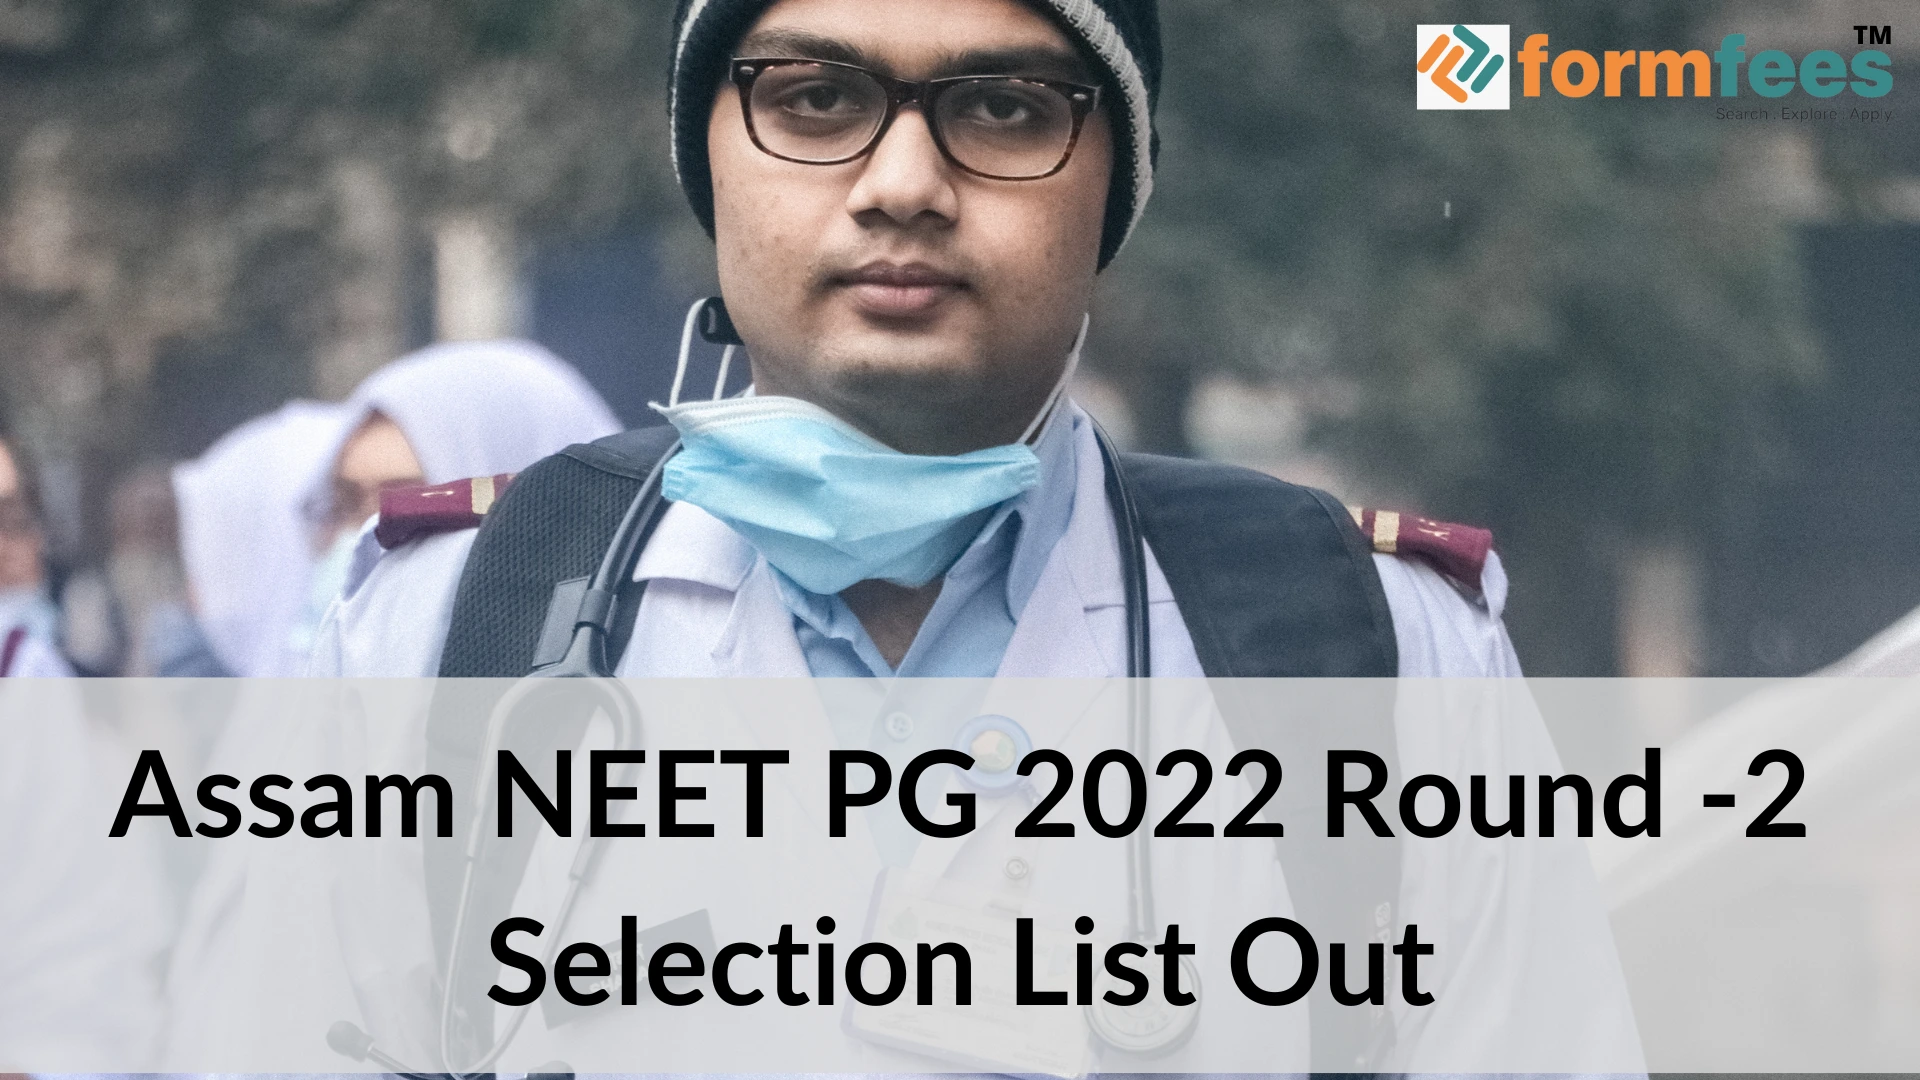 Assam NEET PG 2022 Round -2 Selection List Out